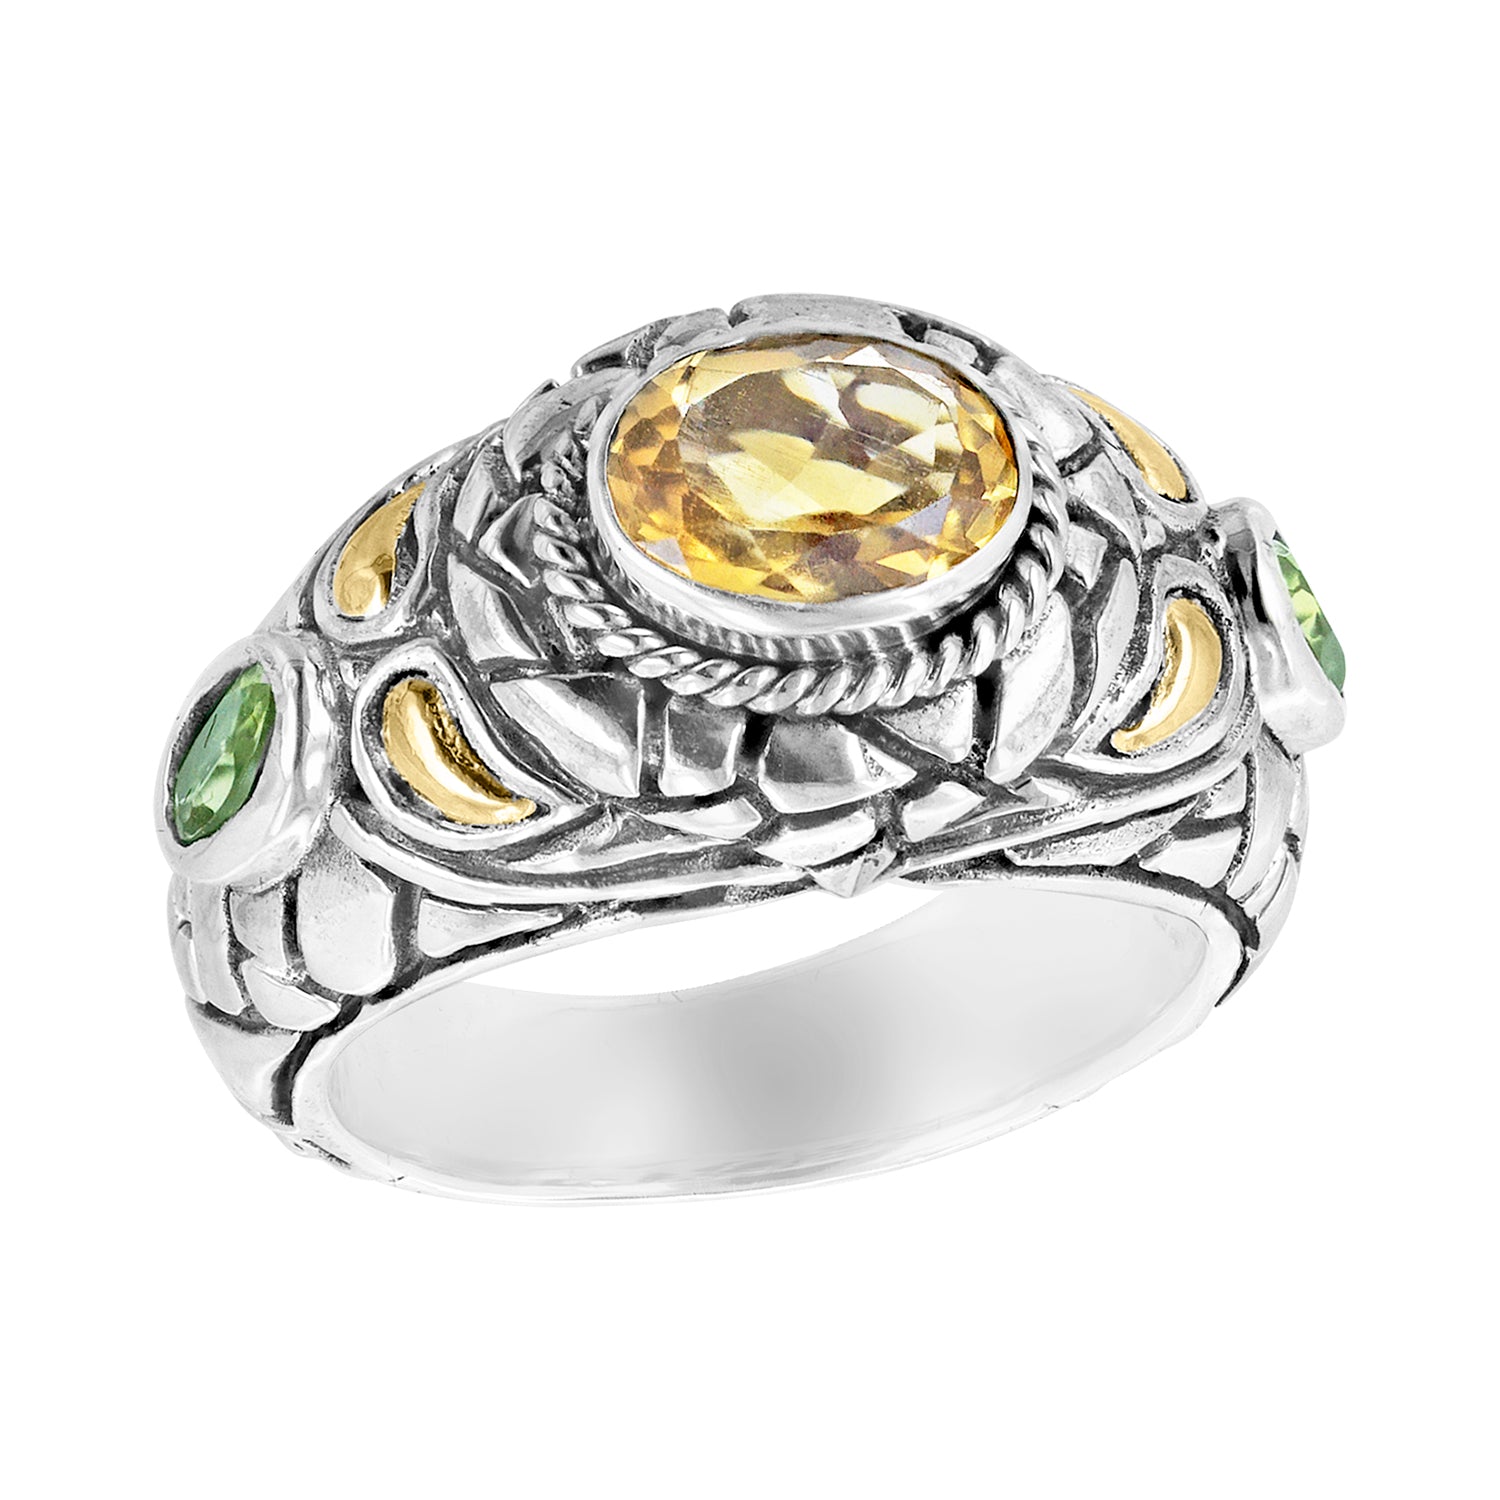 Sterling silver cobblestone yellow and green gemstone ring